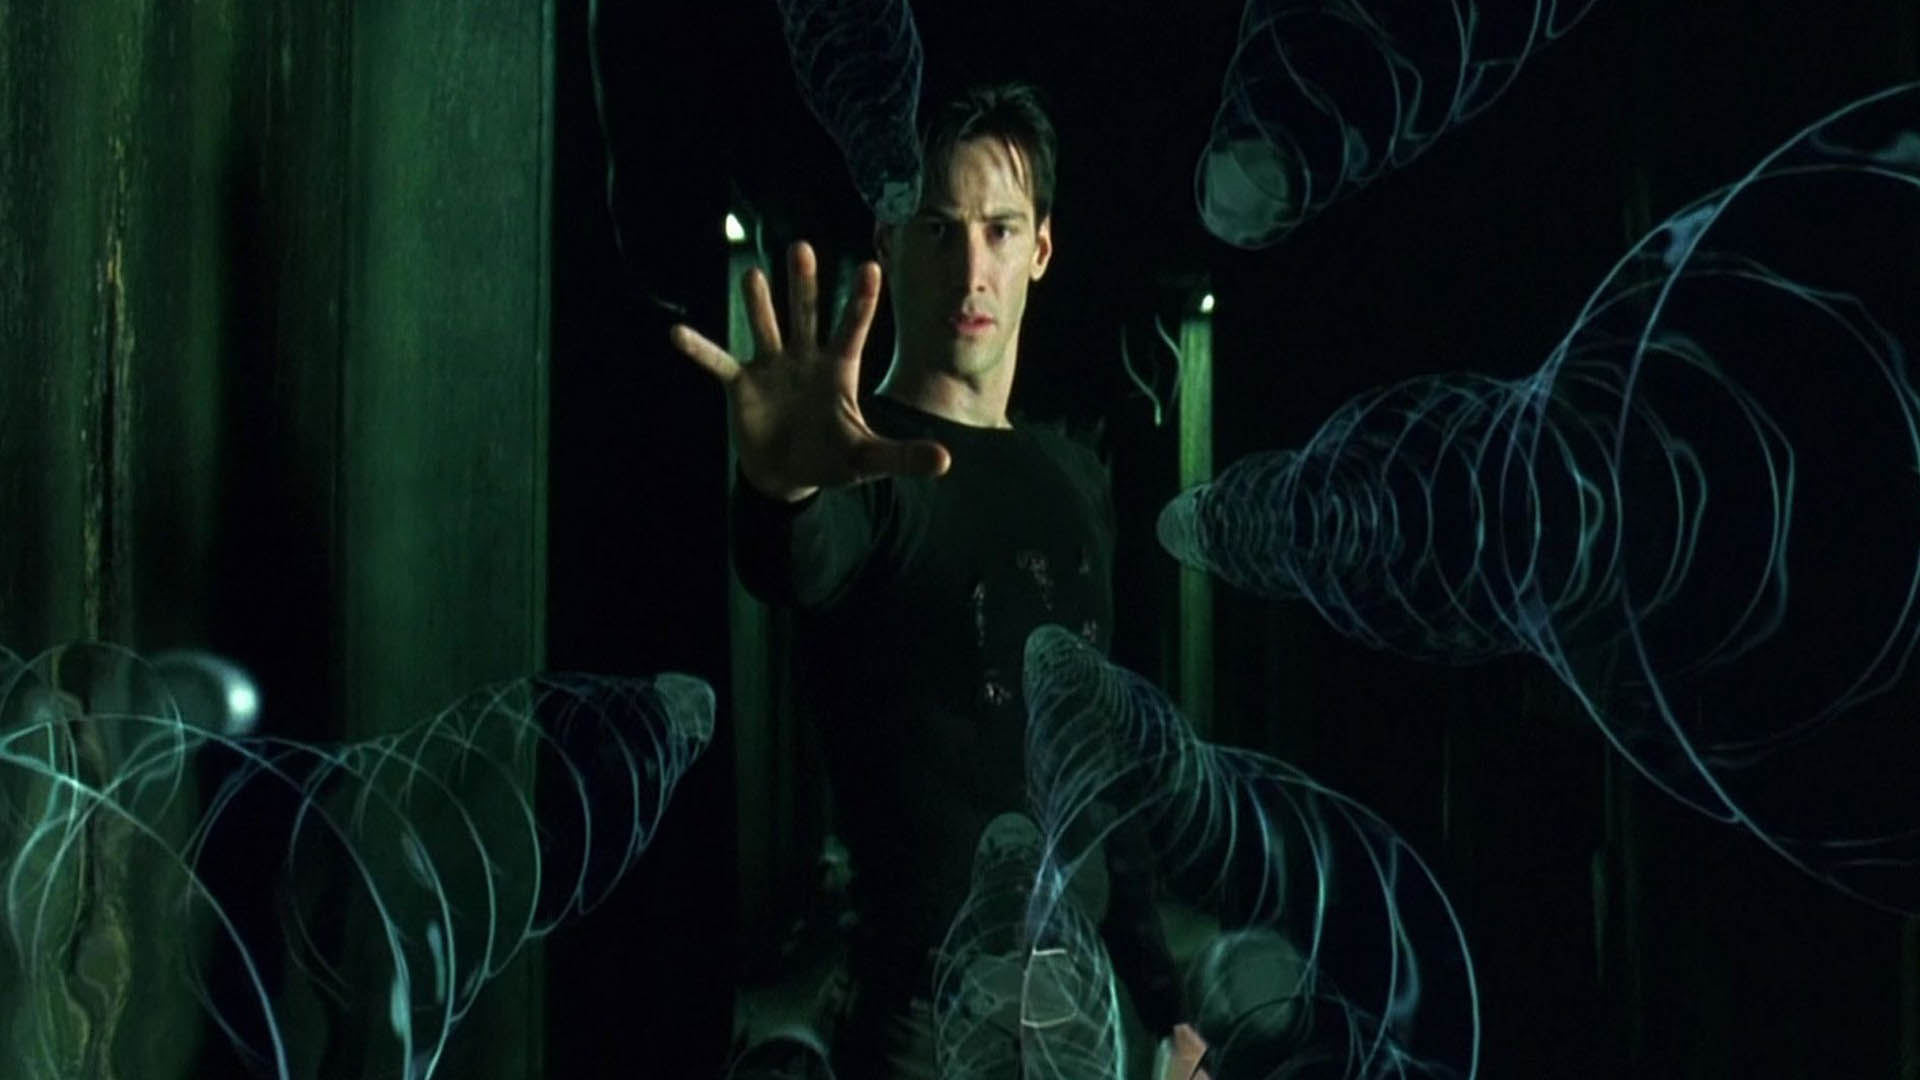 Playing the role of Keanu Reeves in the movie The Matrix